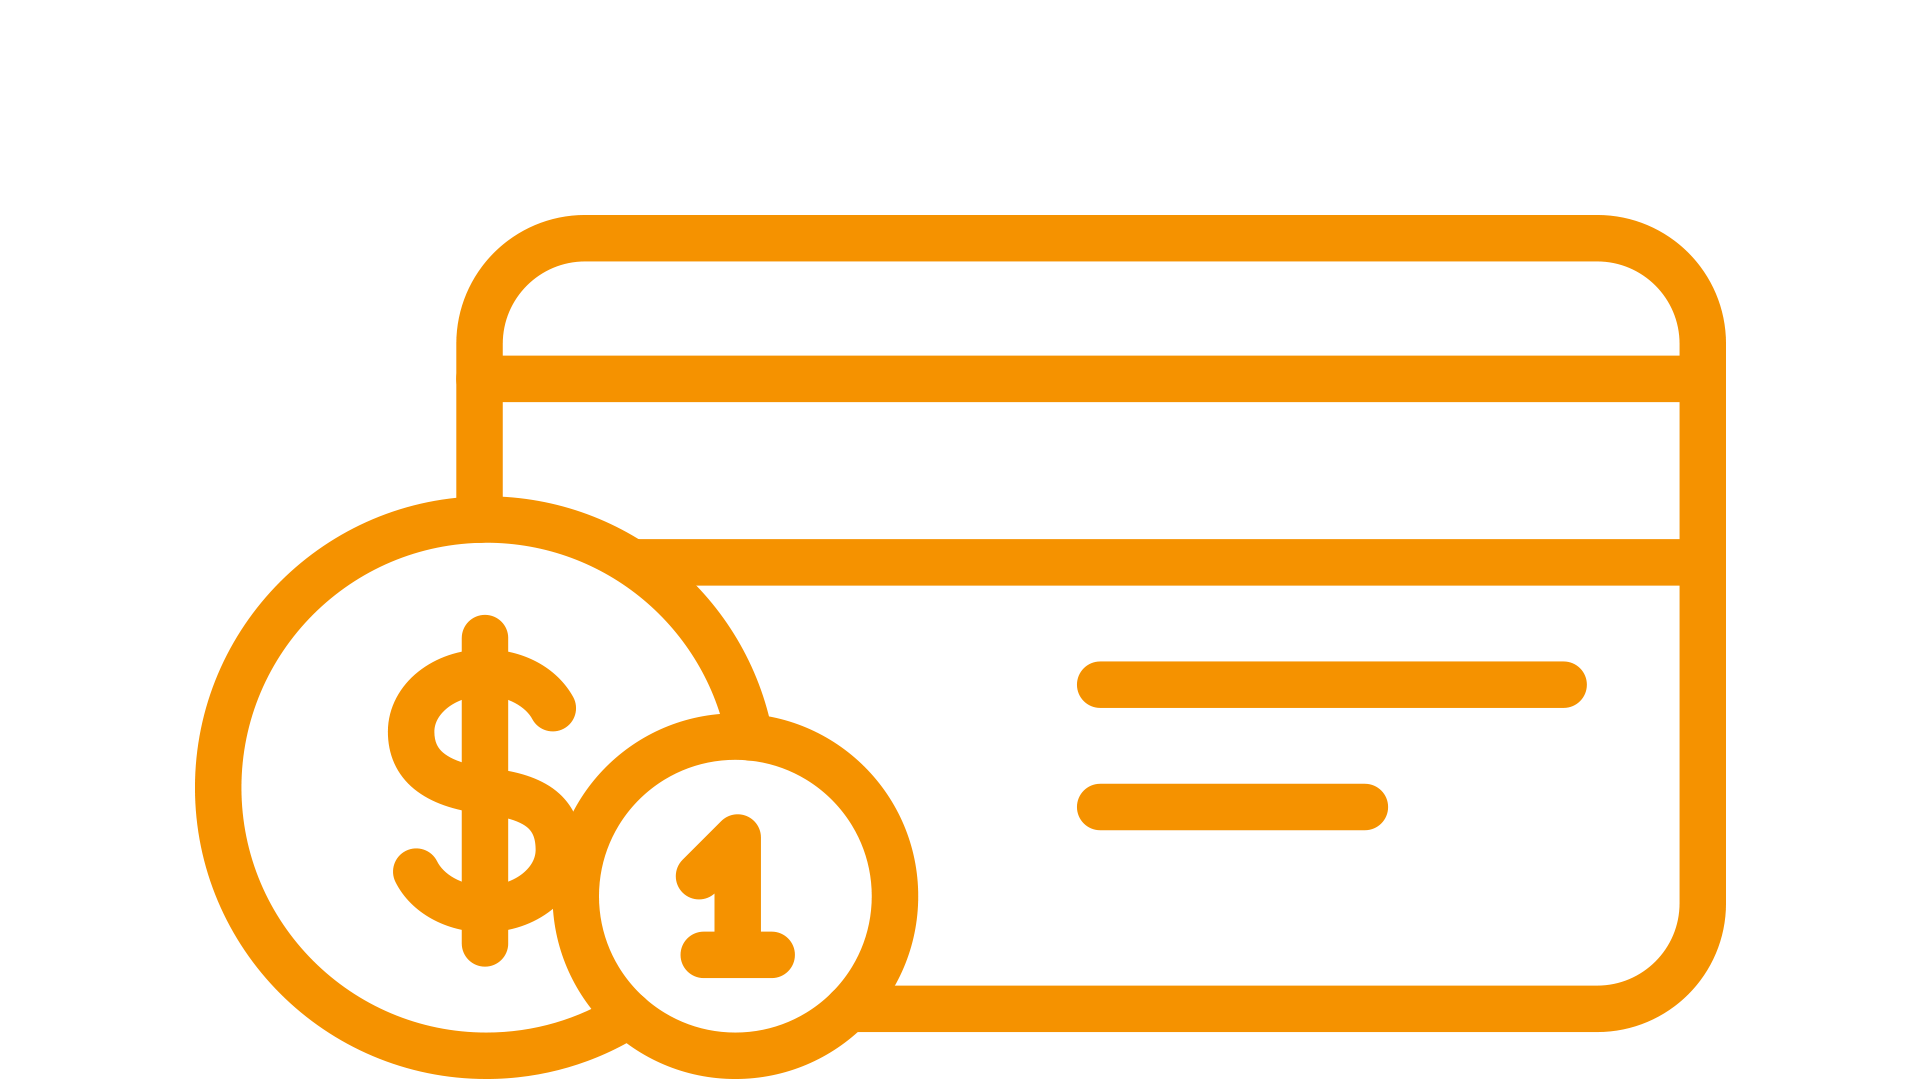 pictogram of a banking symbol